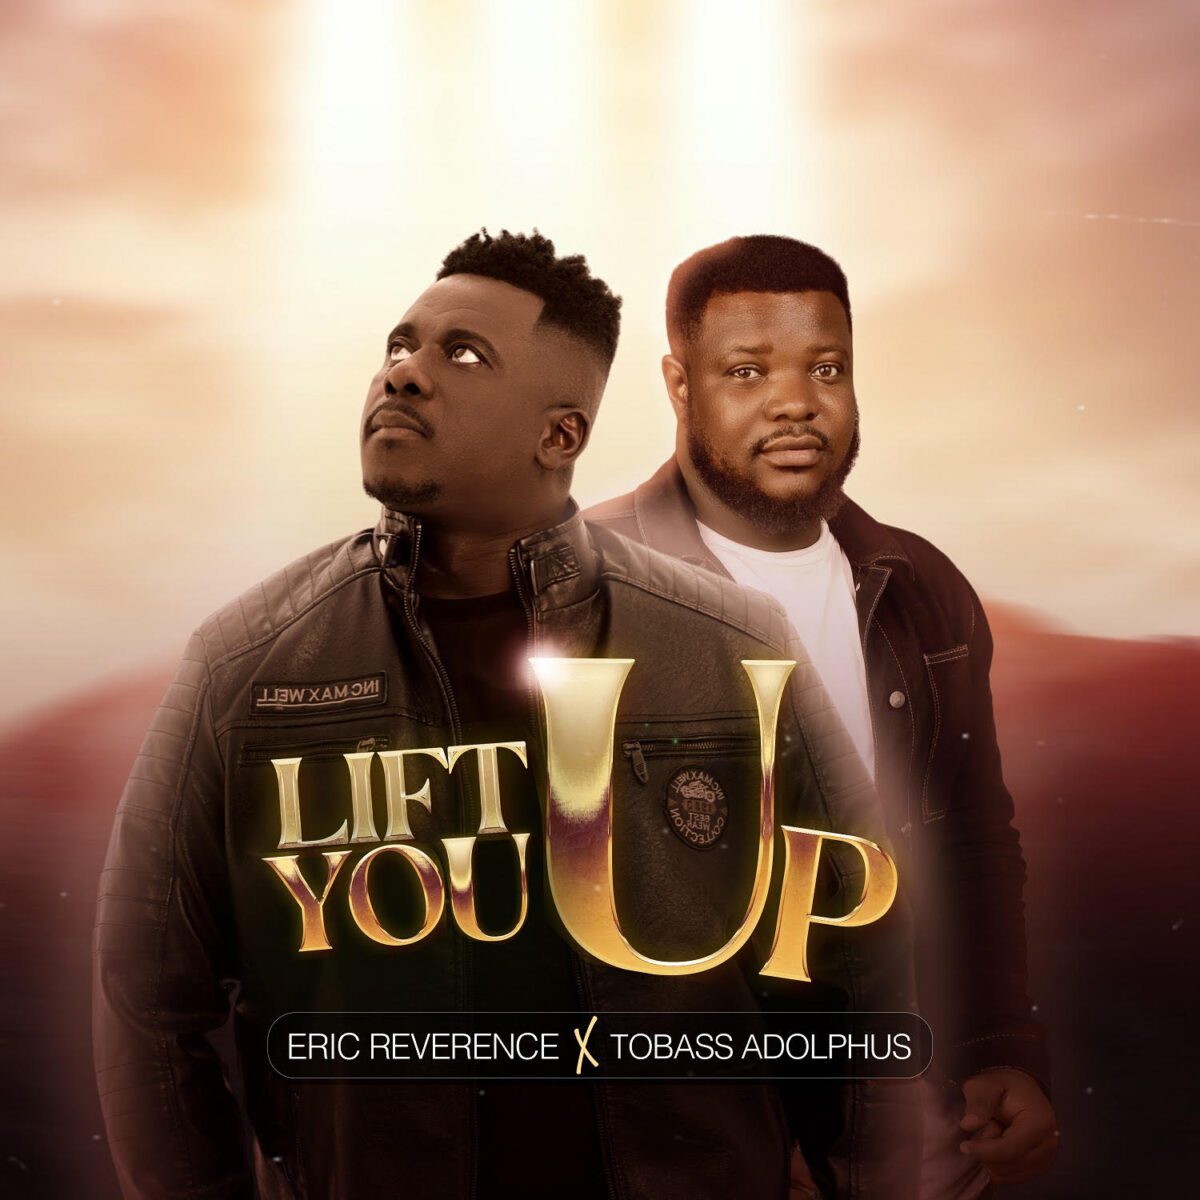 TMAQTALK MUSIC : Eric Reverence - Lift You Up Ft. Tobass Adolphus 2